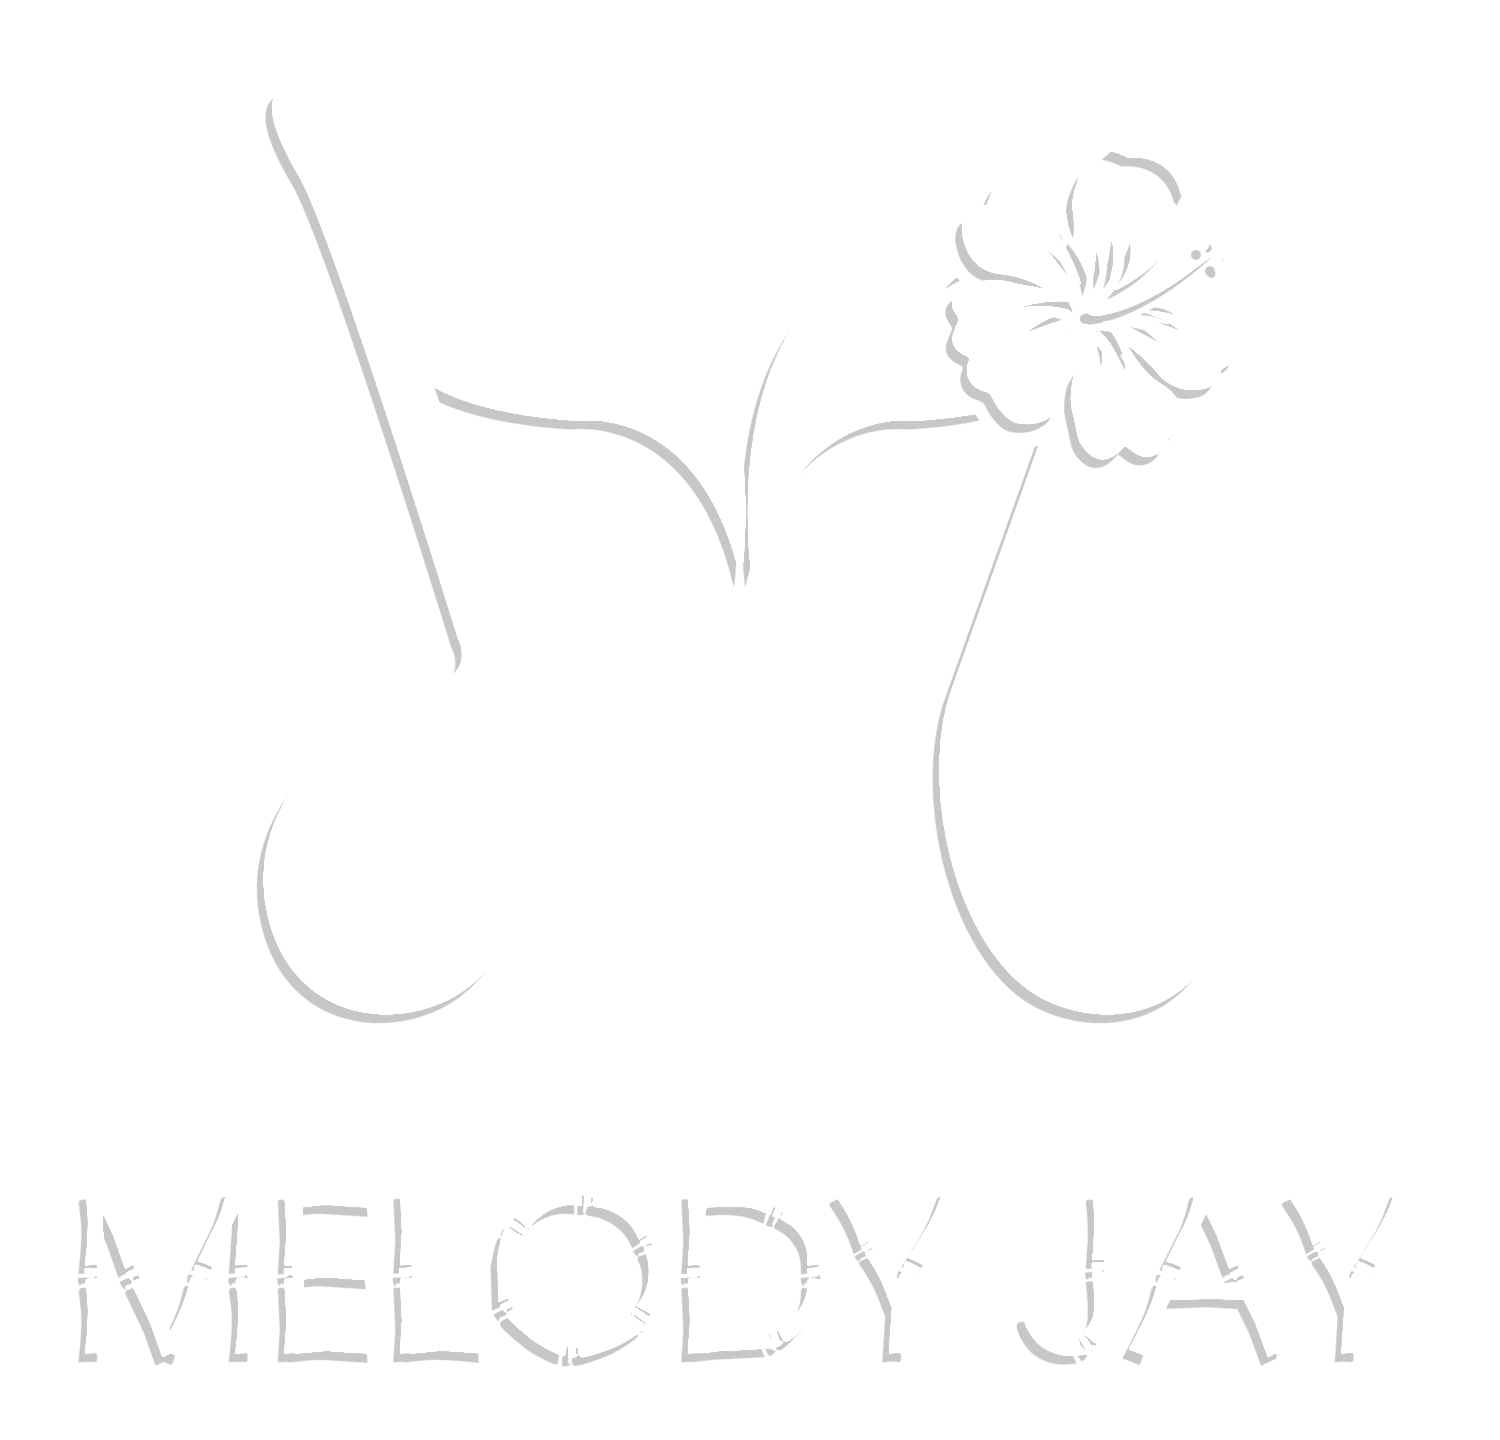 The Official Website of Melody Jay